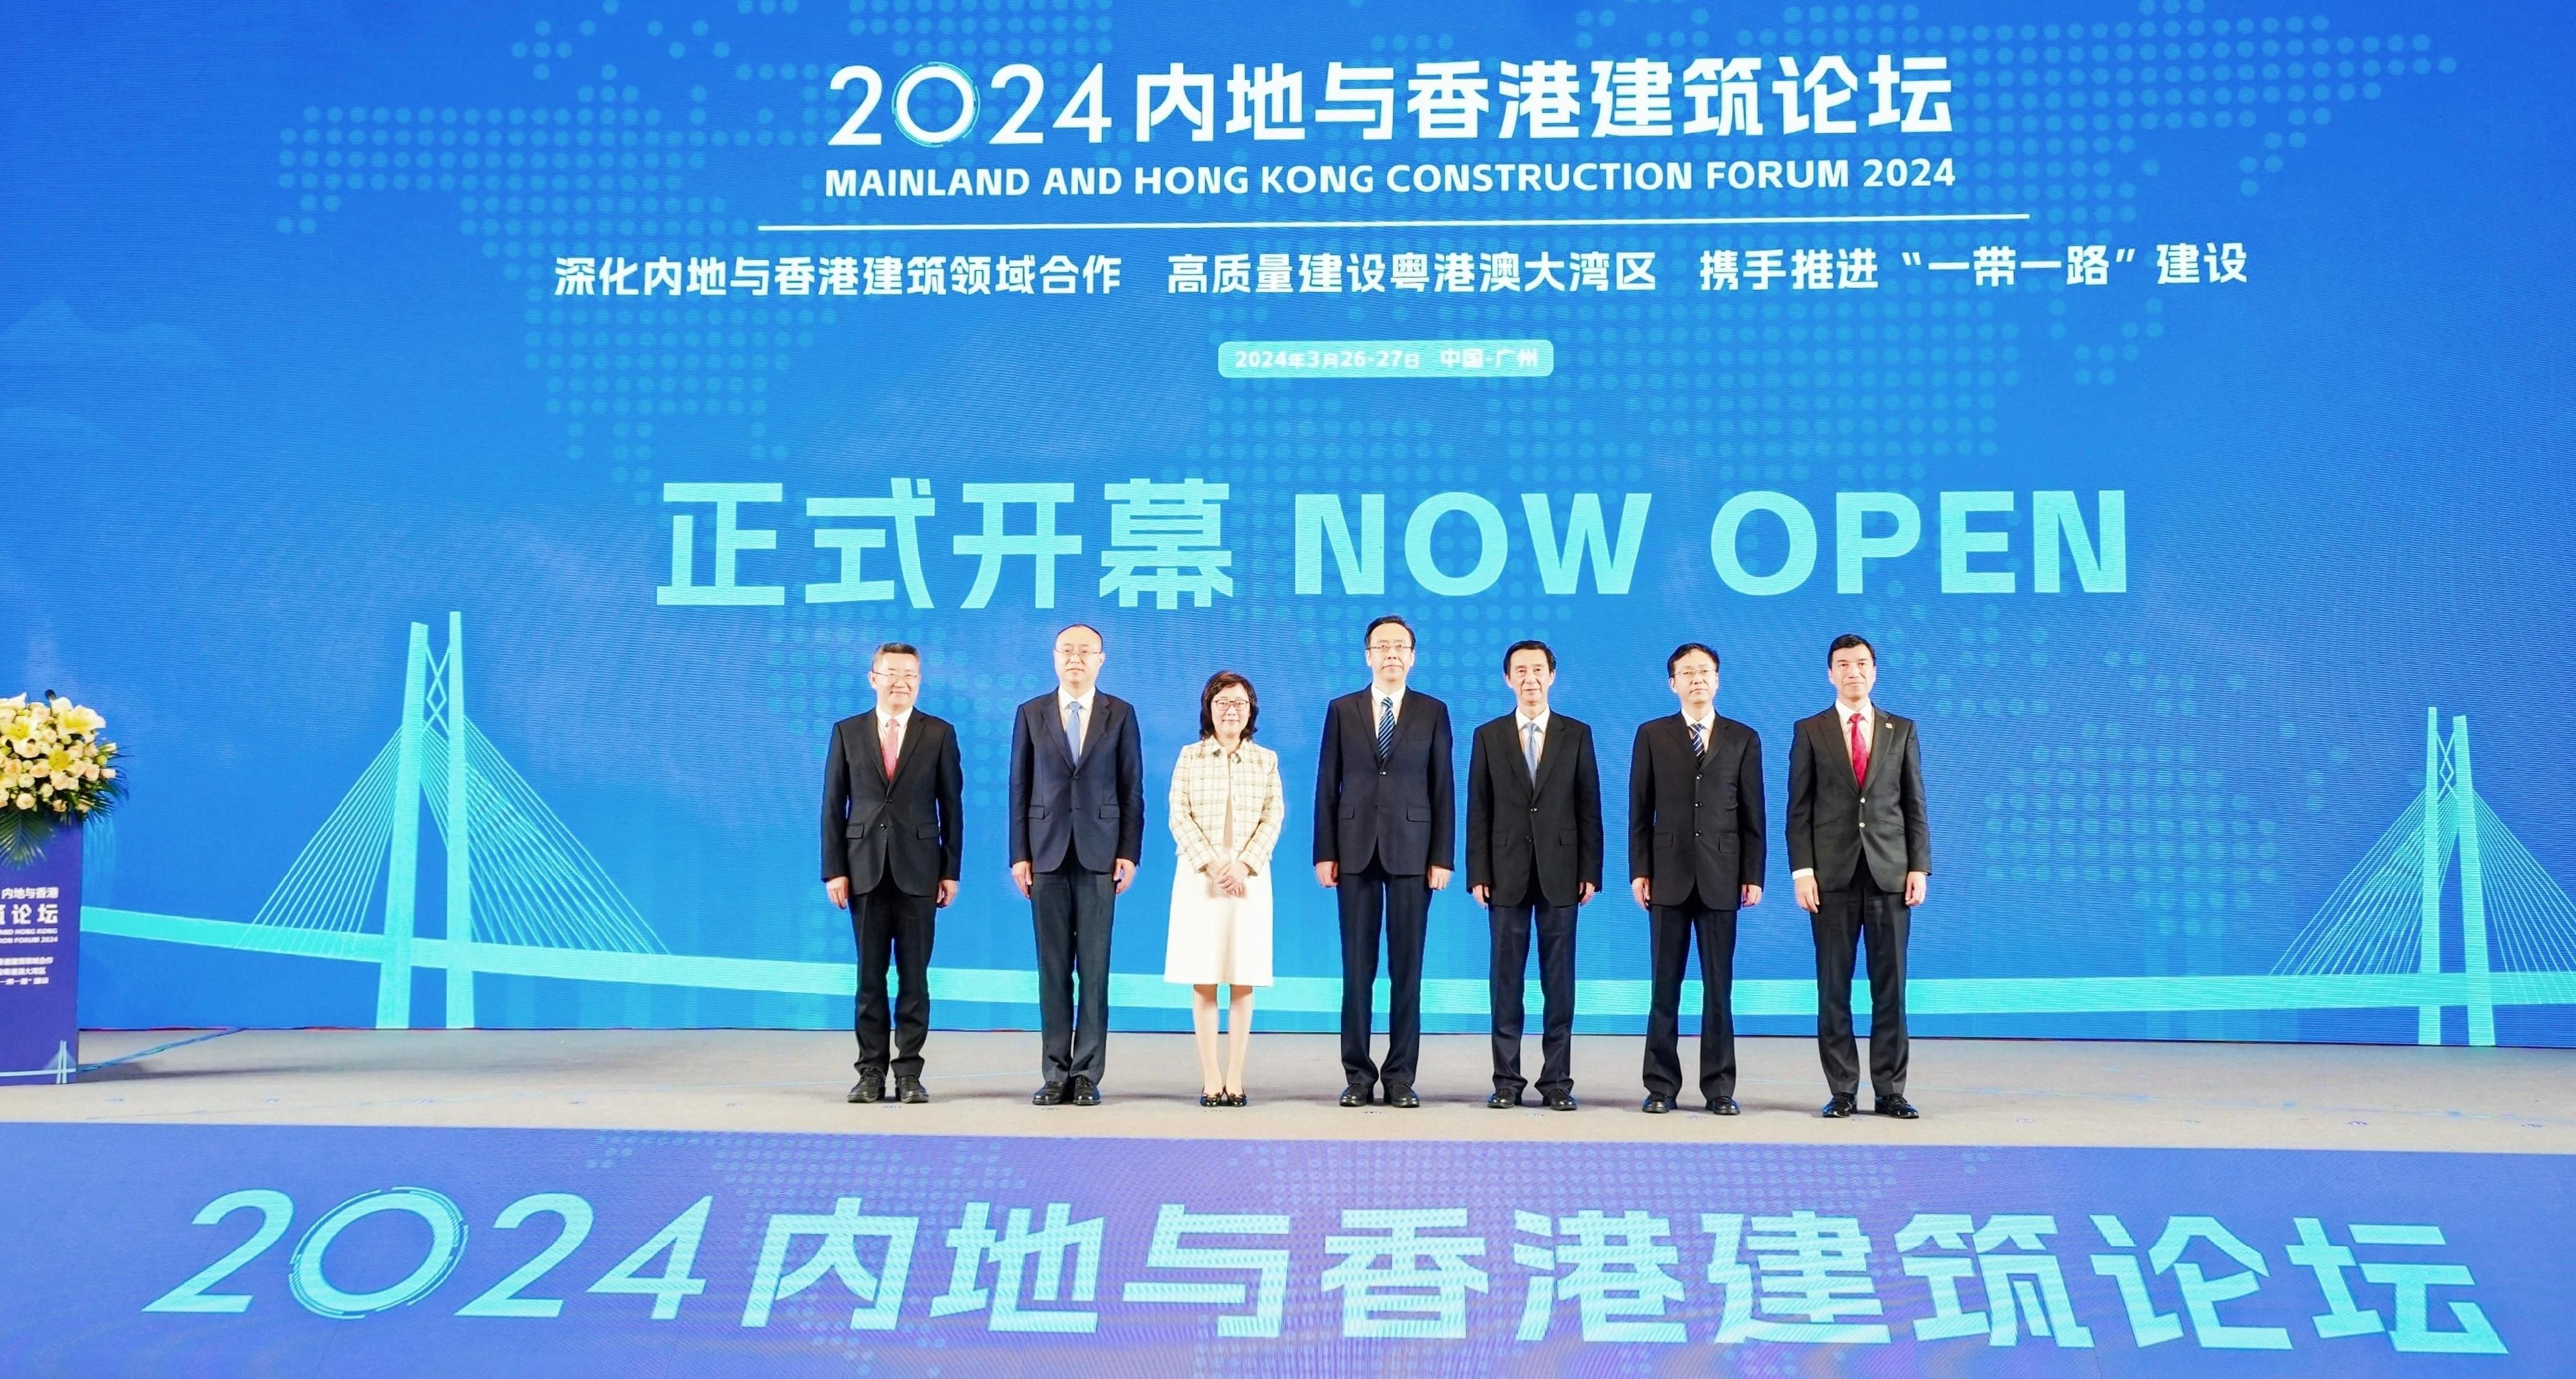 The Secretary for Development, Ms Bernadette Linn, attended the Mainland and Hong Kong Construction Forum 2024 in Guangzhou today (March 26). Photo shows Ms Linn (third left); Vice-Minister of the Ministry of Housing and Urban-Rural Development (MOHURD) Mr Wang Hui (centre); Vice-Governor of the People's Government of Guangdong Province Mr Zhang Shaokang (third right); the Director-General of the Department of Housing and Urban-Rural Development of Guangdong Province, Mr Zhang Yong (second left); the Director-General of the Centre of Science and Technology Industrial Development of the MOHURD, Mr Liu Xinfeng (second right); Vice Mayor of the Guangzhou Municipal Government Mr Chen Jie (first left); and the President of the Hong Kong Institution of Engineers, Dr Barry Lee (first right), officiating at the opening ceremony.